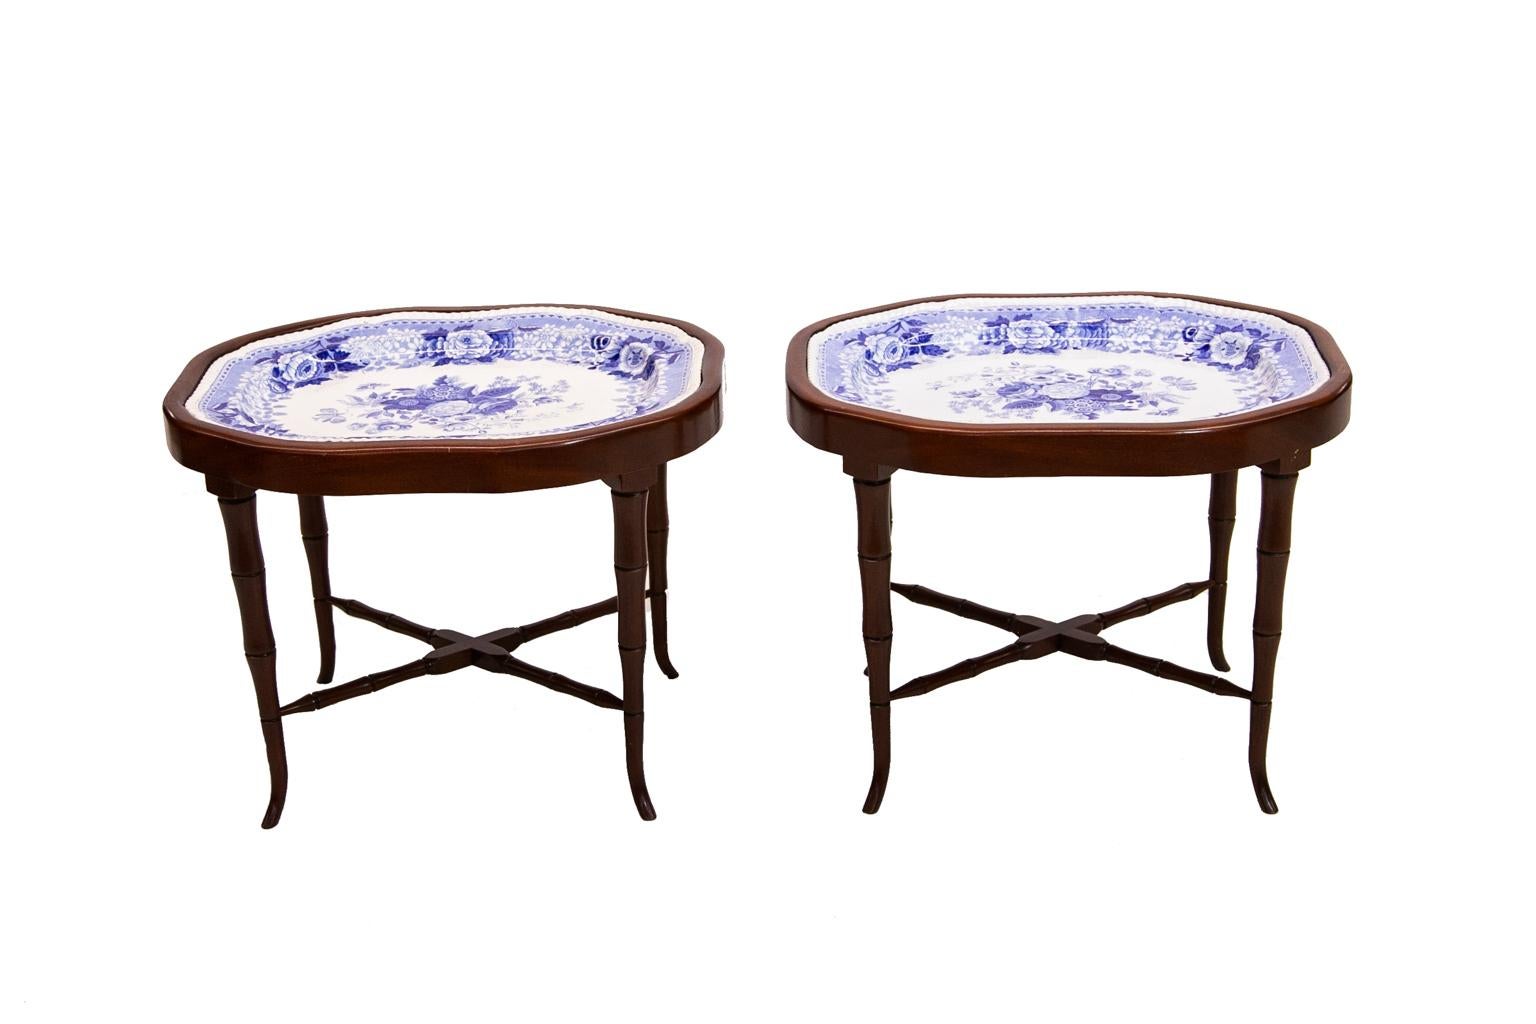 Pair of Staffordshire tray tables were made from two large Staffordshire platters. The stands were custom built to fit the platters. The stands have faux bamboo turned legs and cross stretchers. One platter is signed 